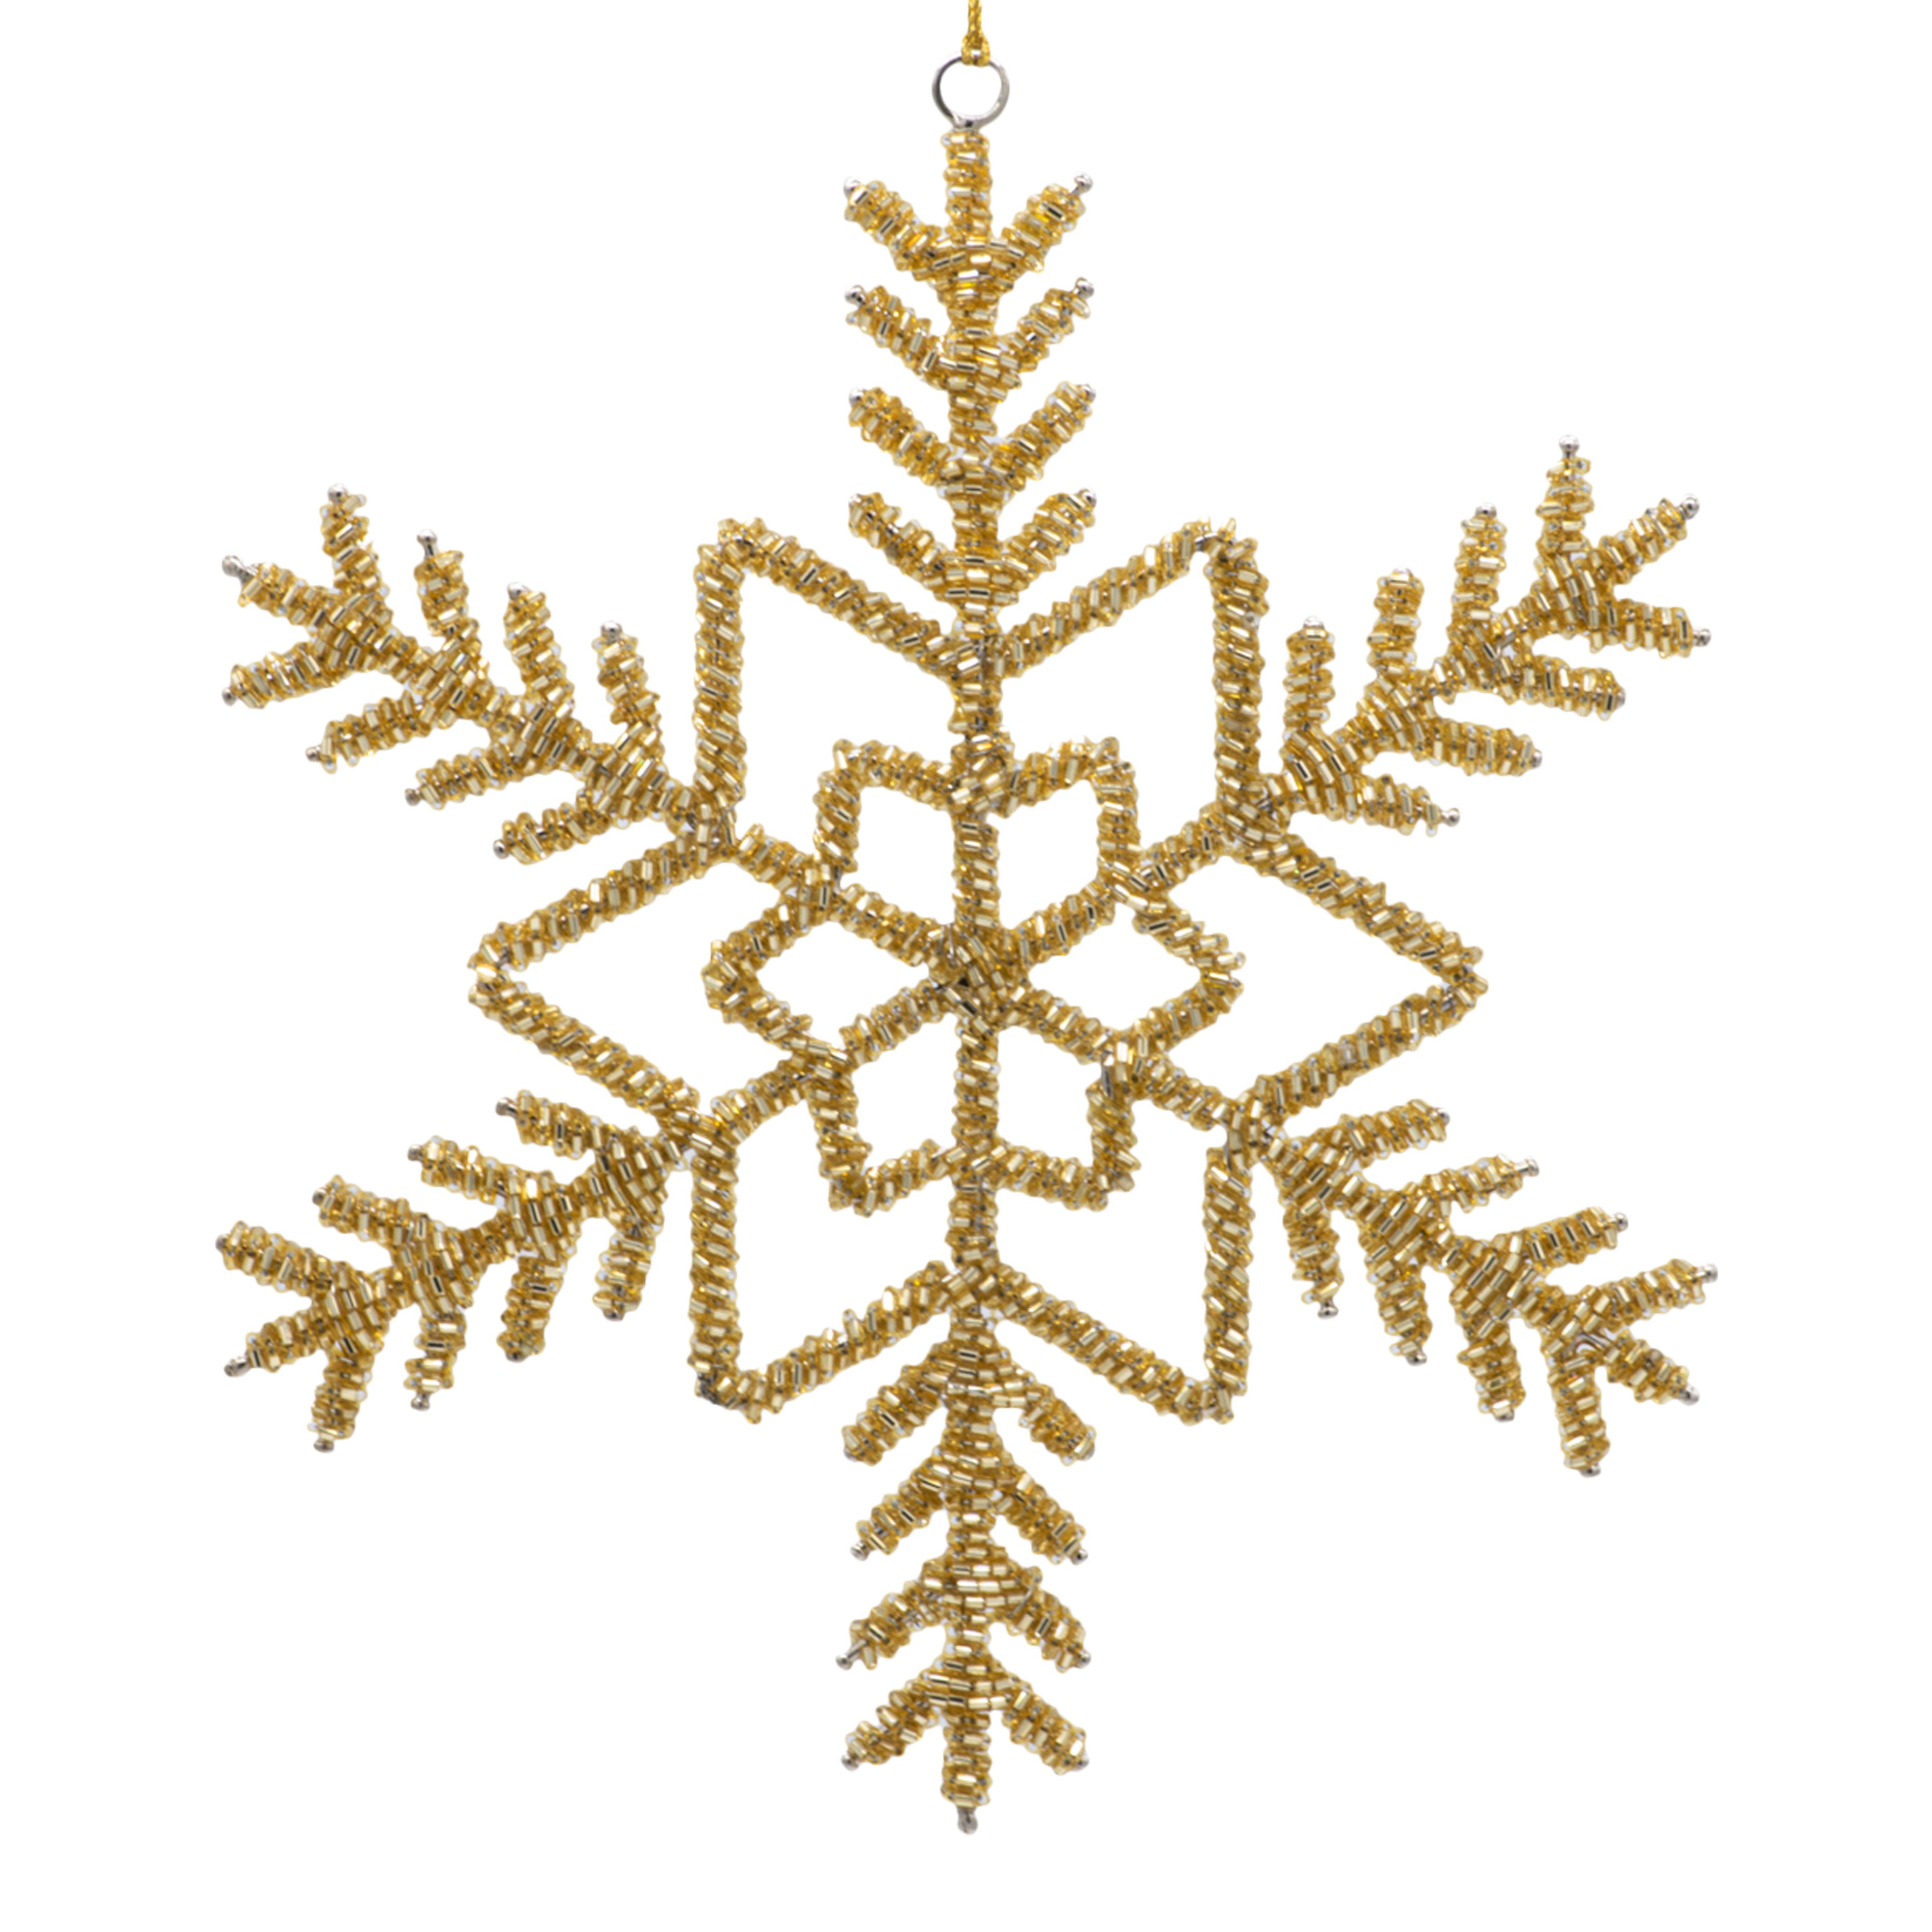 Beaded snowflake Christmas decoration on a white background